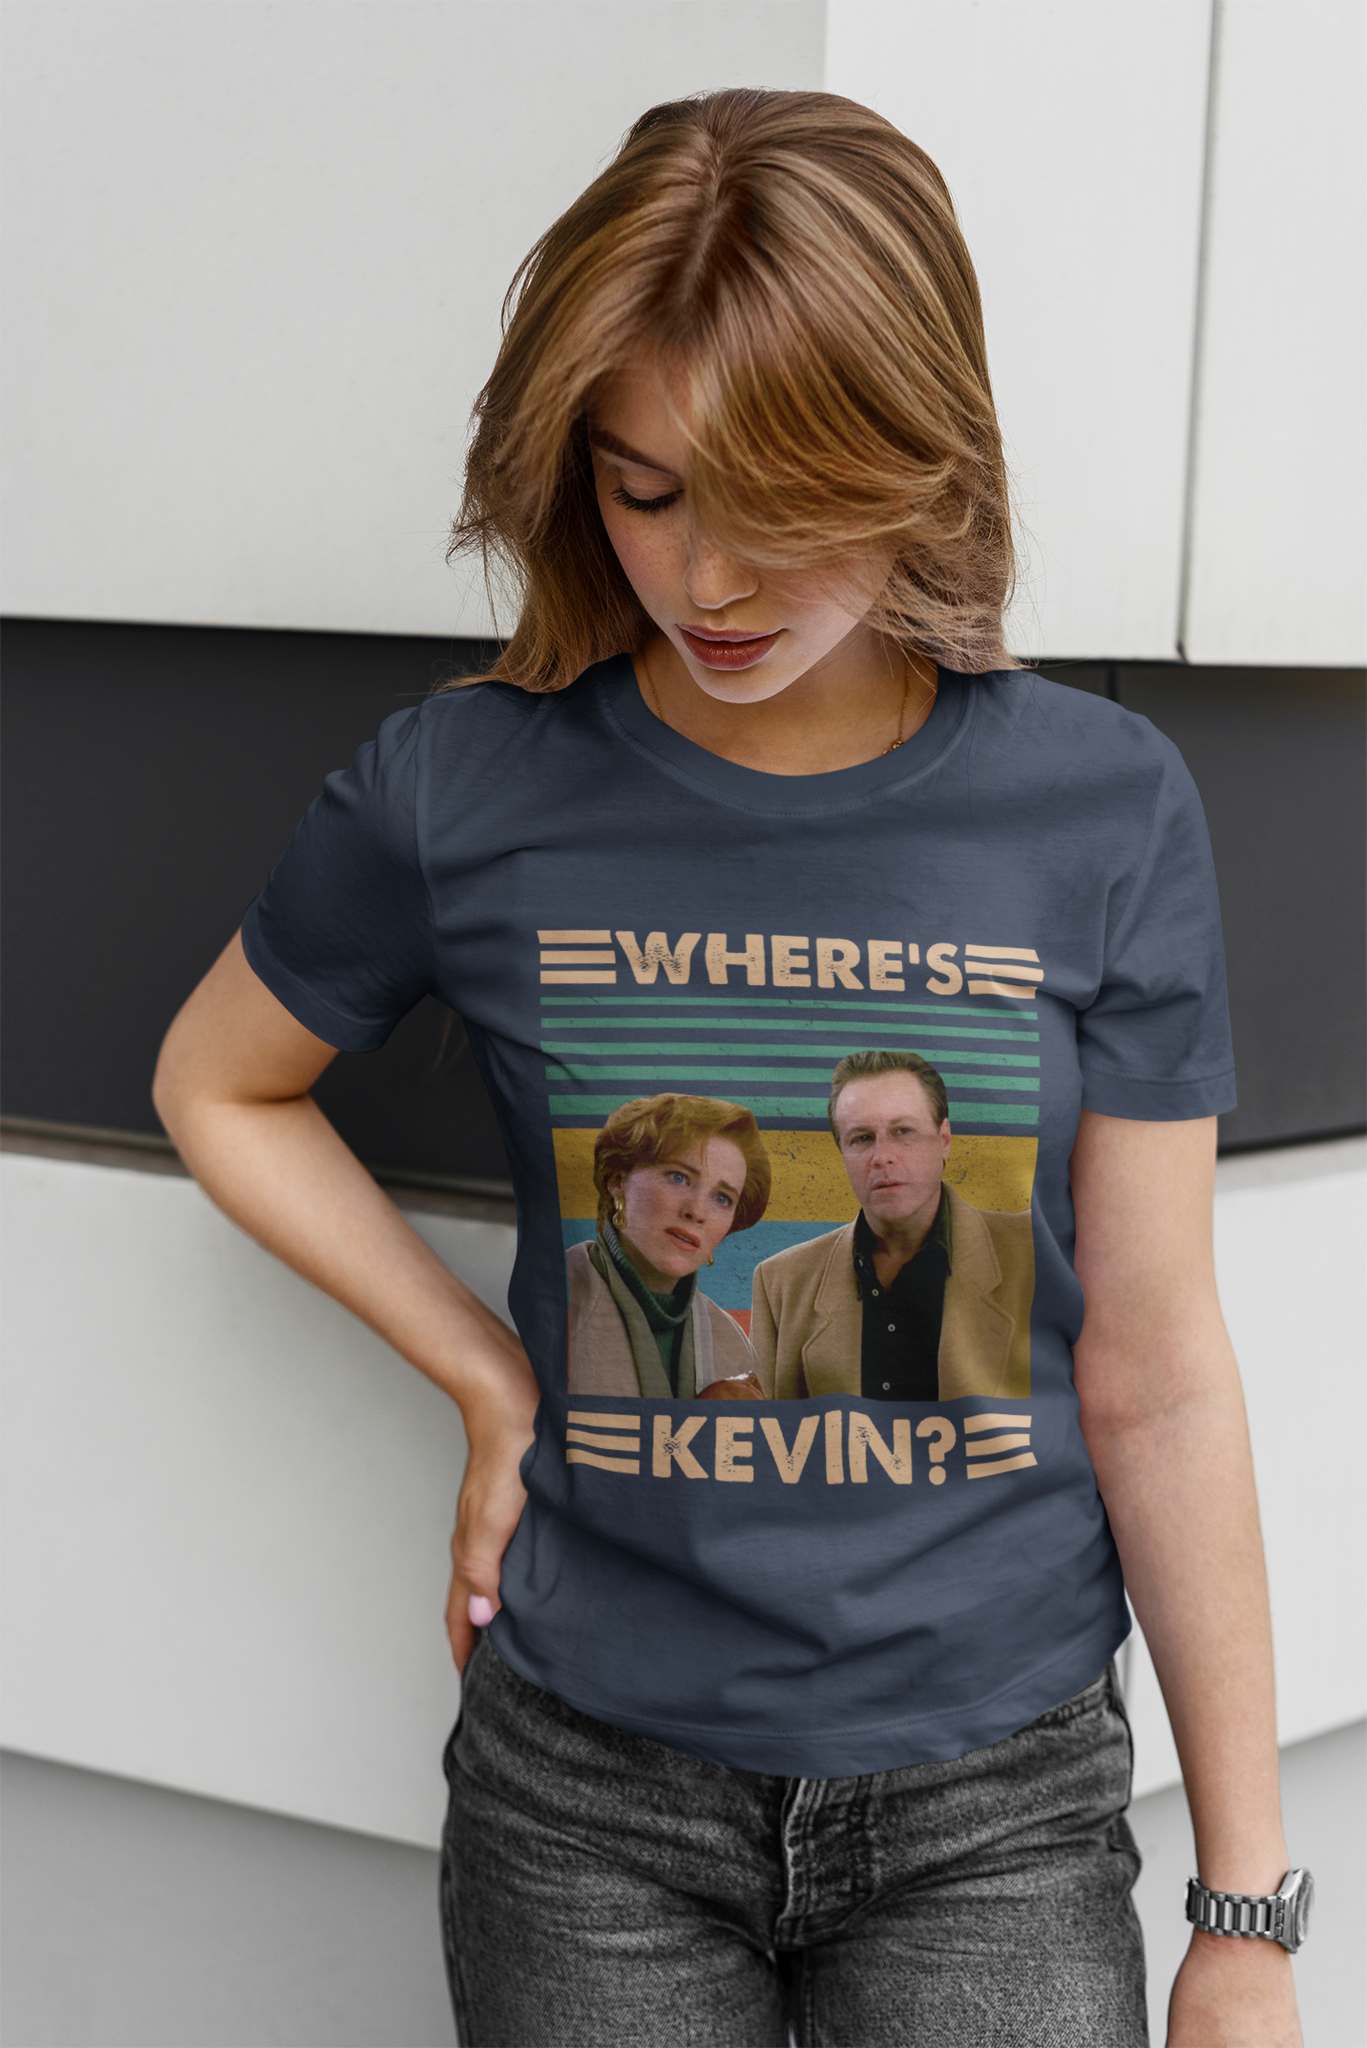 Home Alone Vintage T Shirt, Wheres Kevin Tshirt, Kate Peter McCallister T Shirt, Christmas Gifts